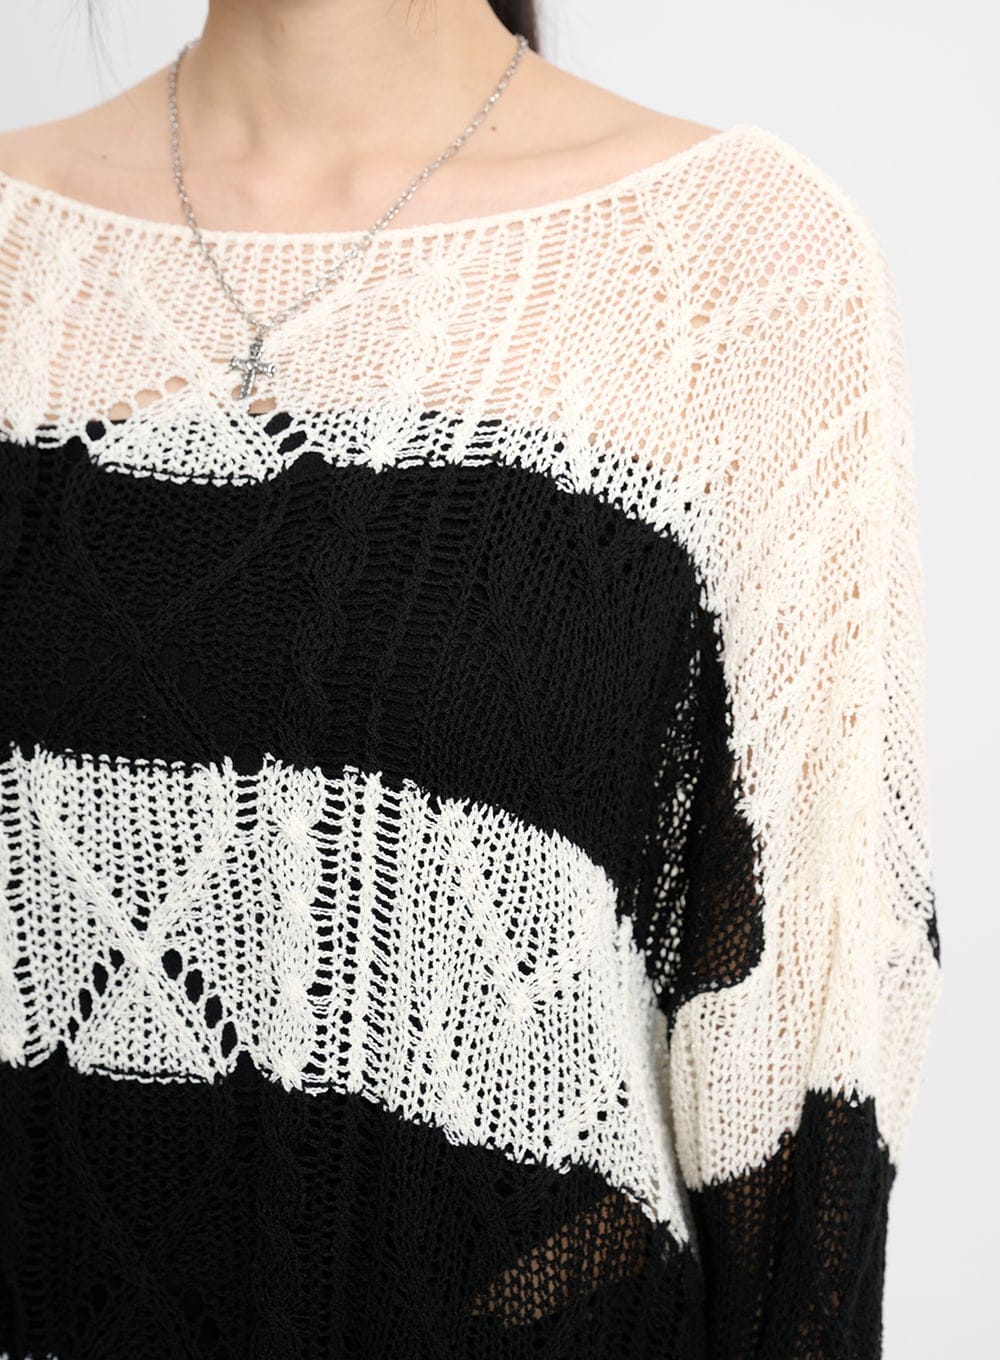 wool-blend-hollow-out-striped-knit-sweater-cm415